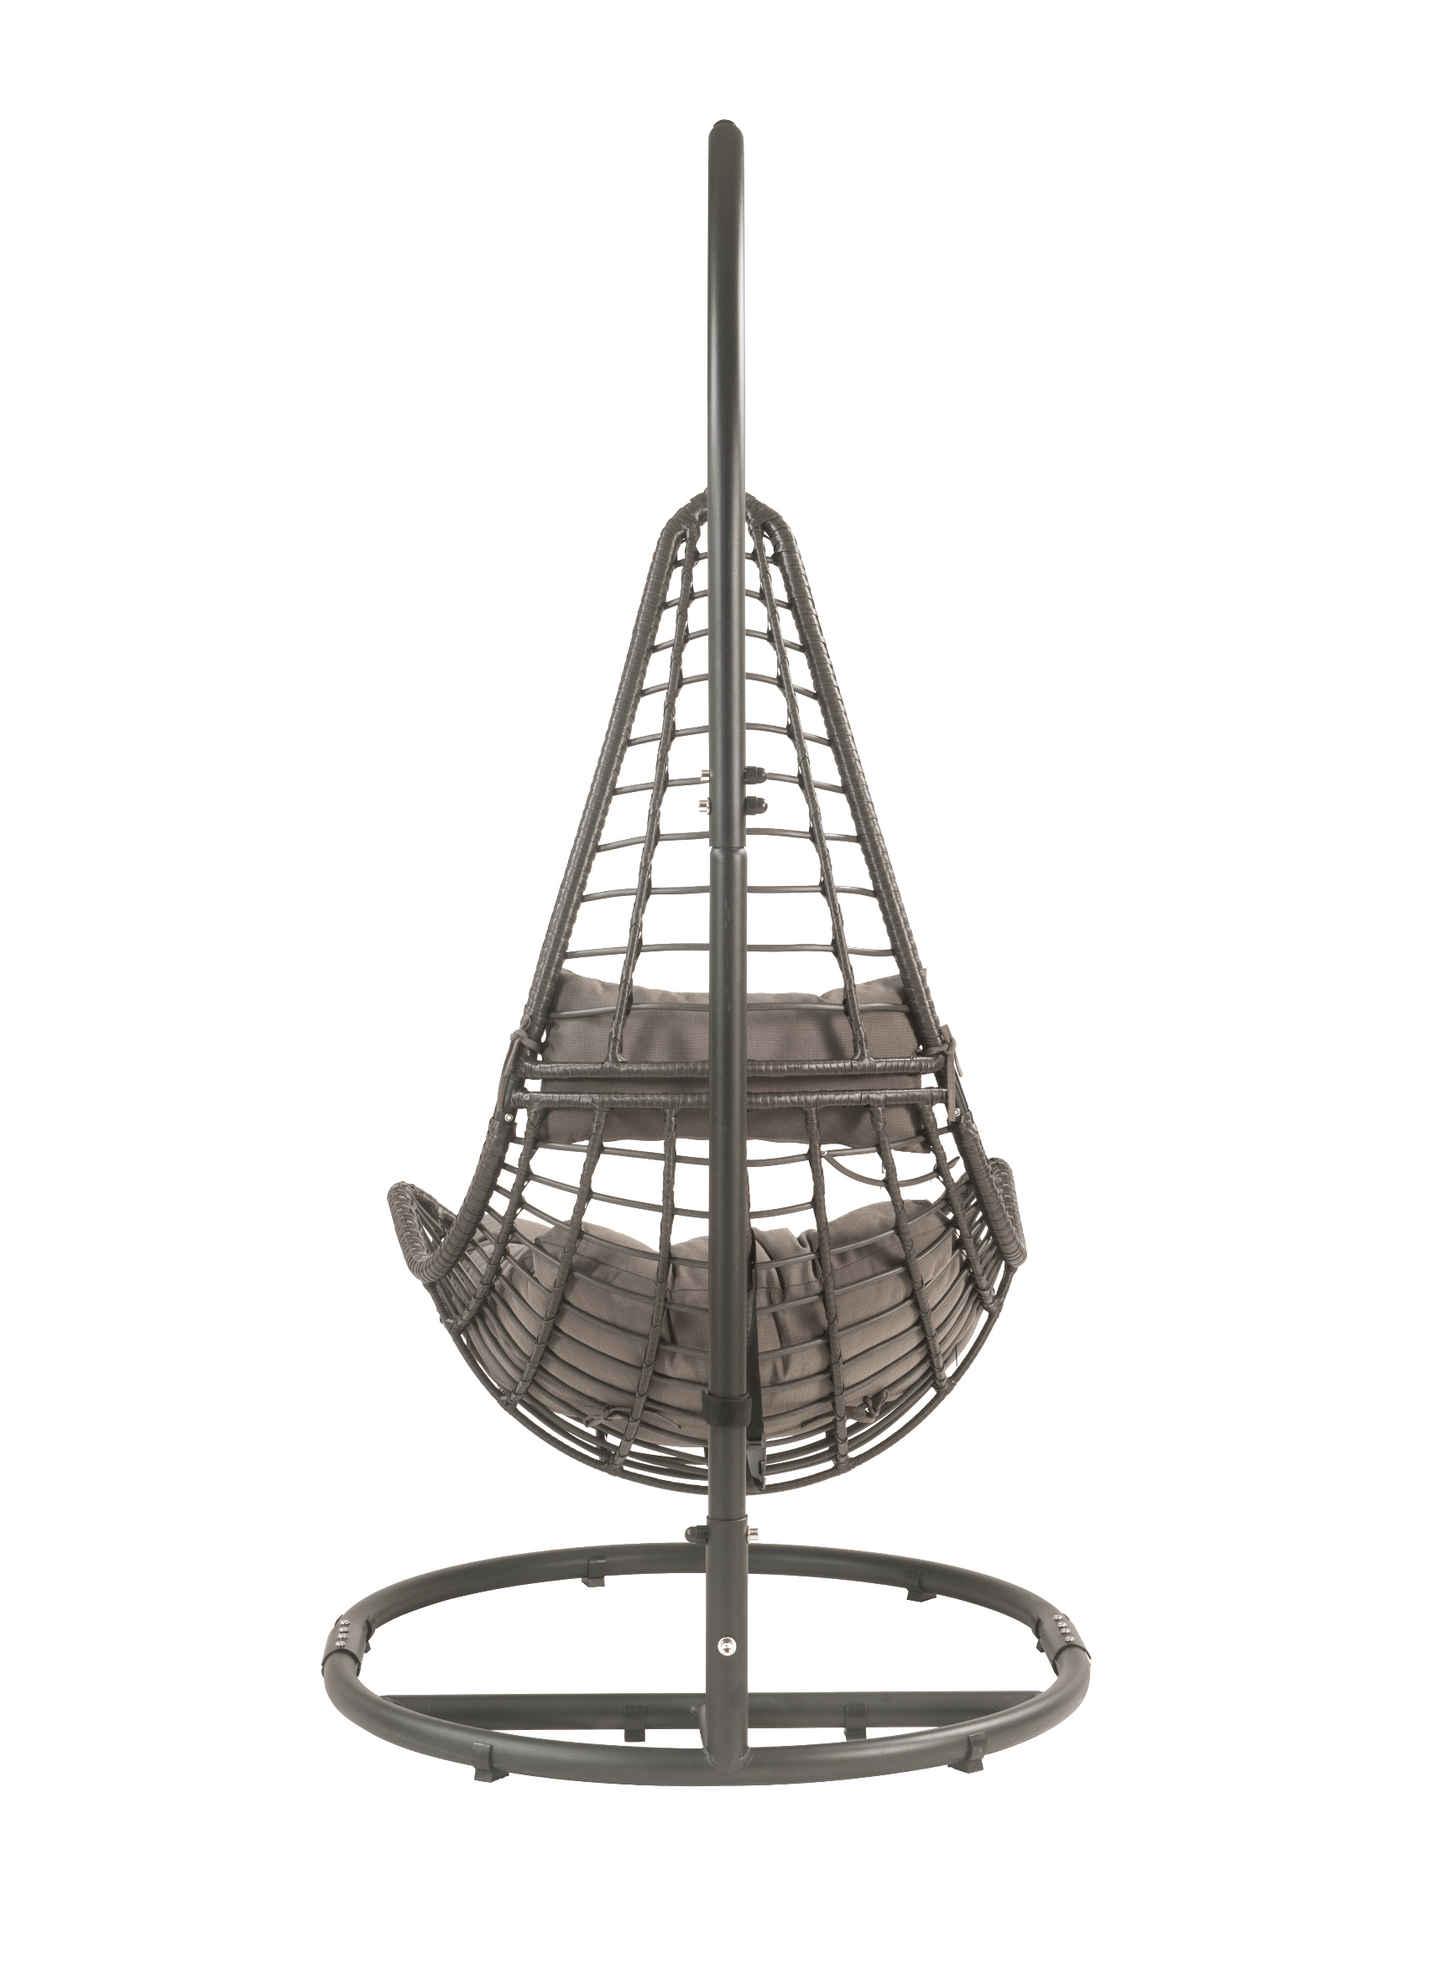 Uzae hanging chair with stand